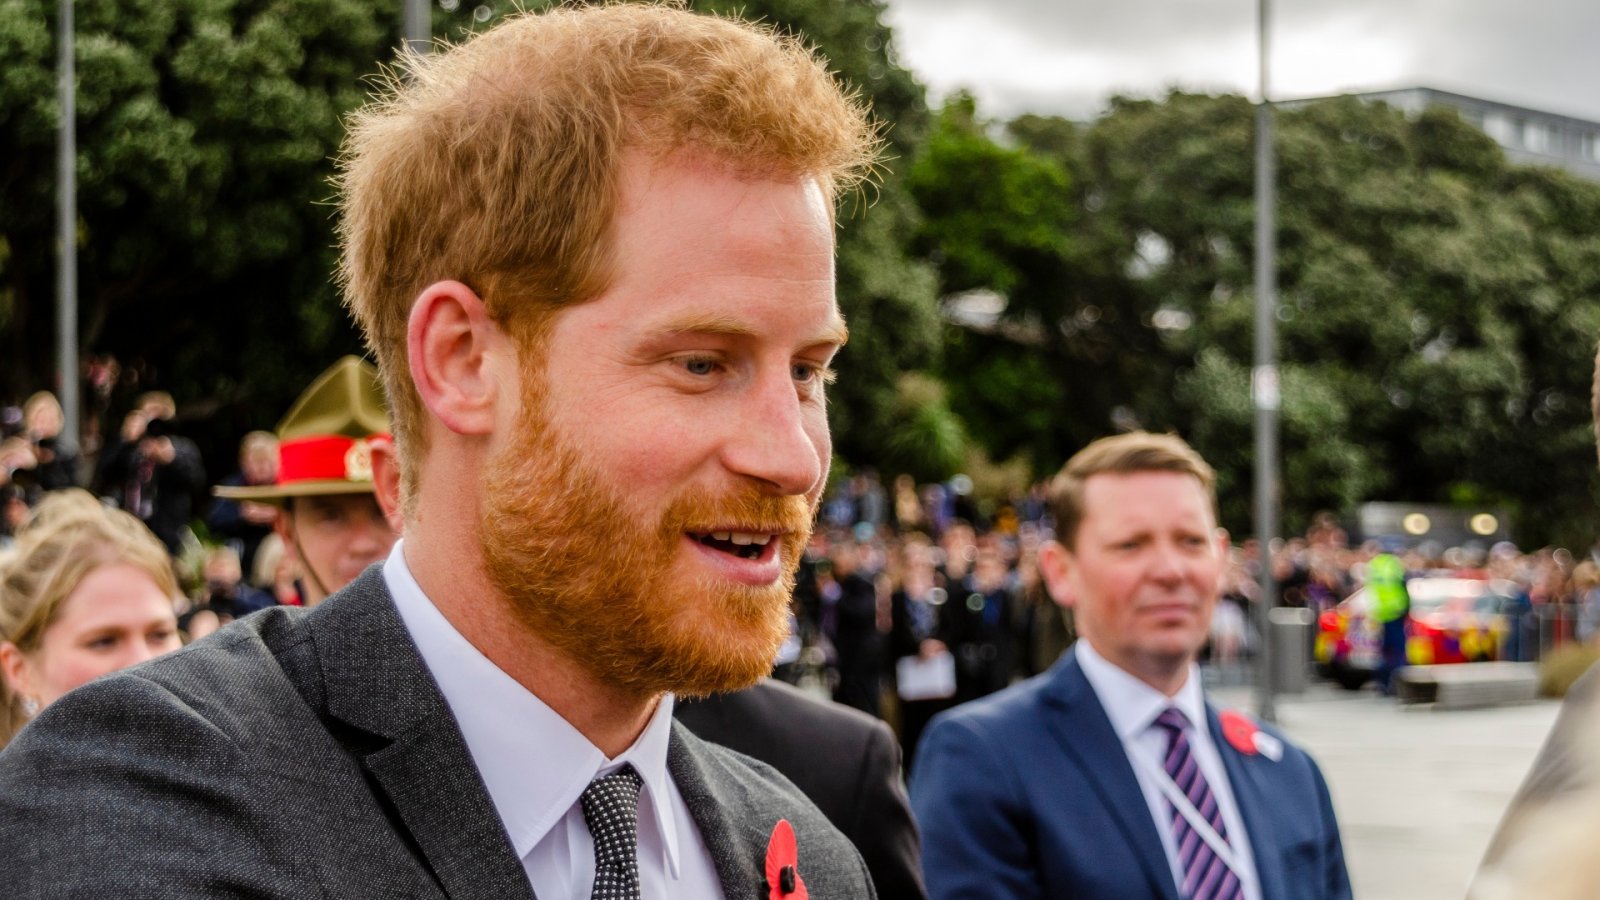 Not a moment in his life where he didn’t feel put down: Prince Harry’s sincere autobiography